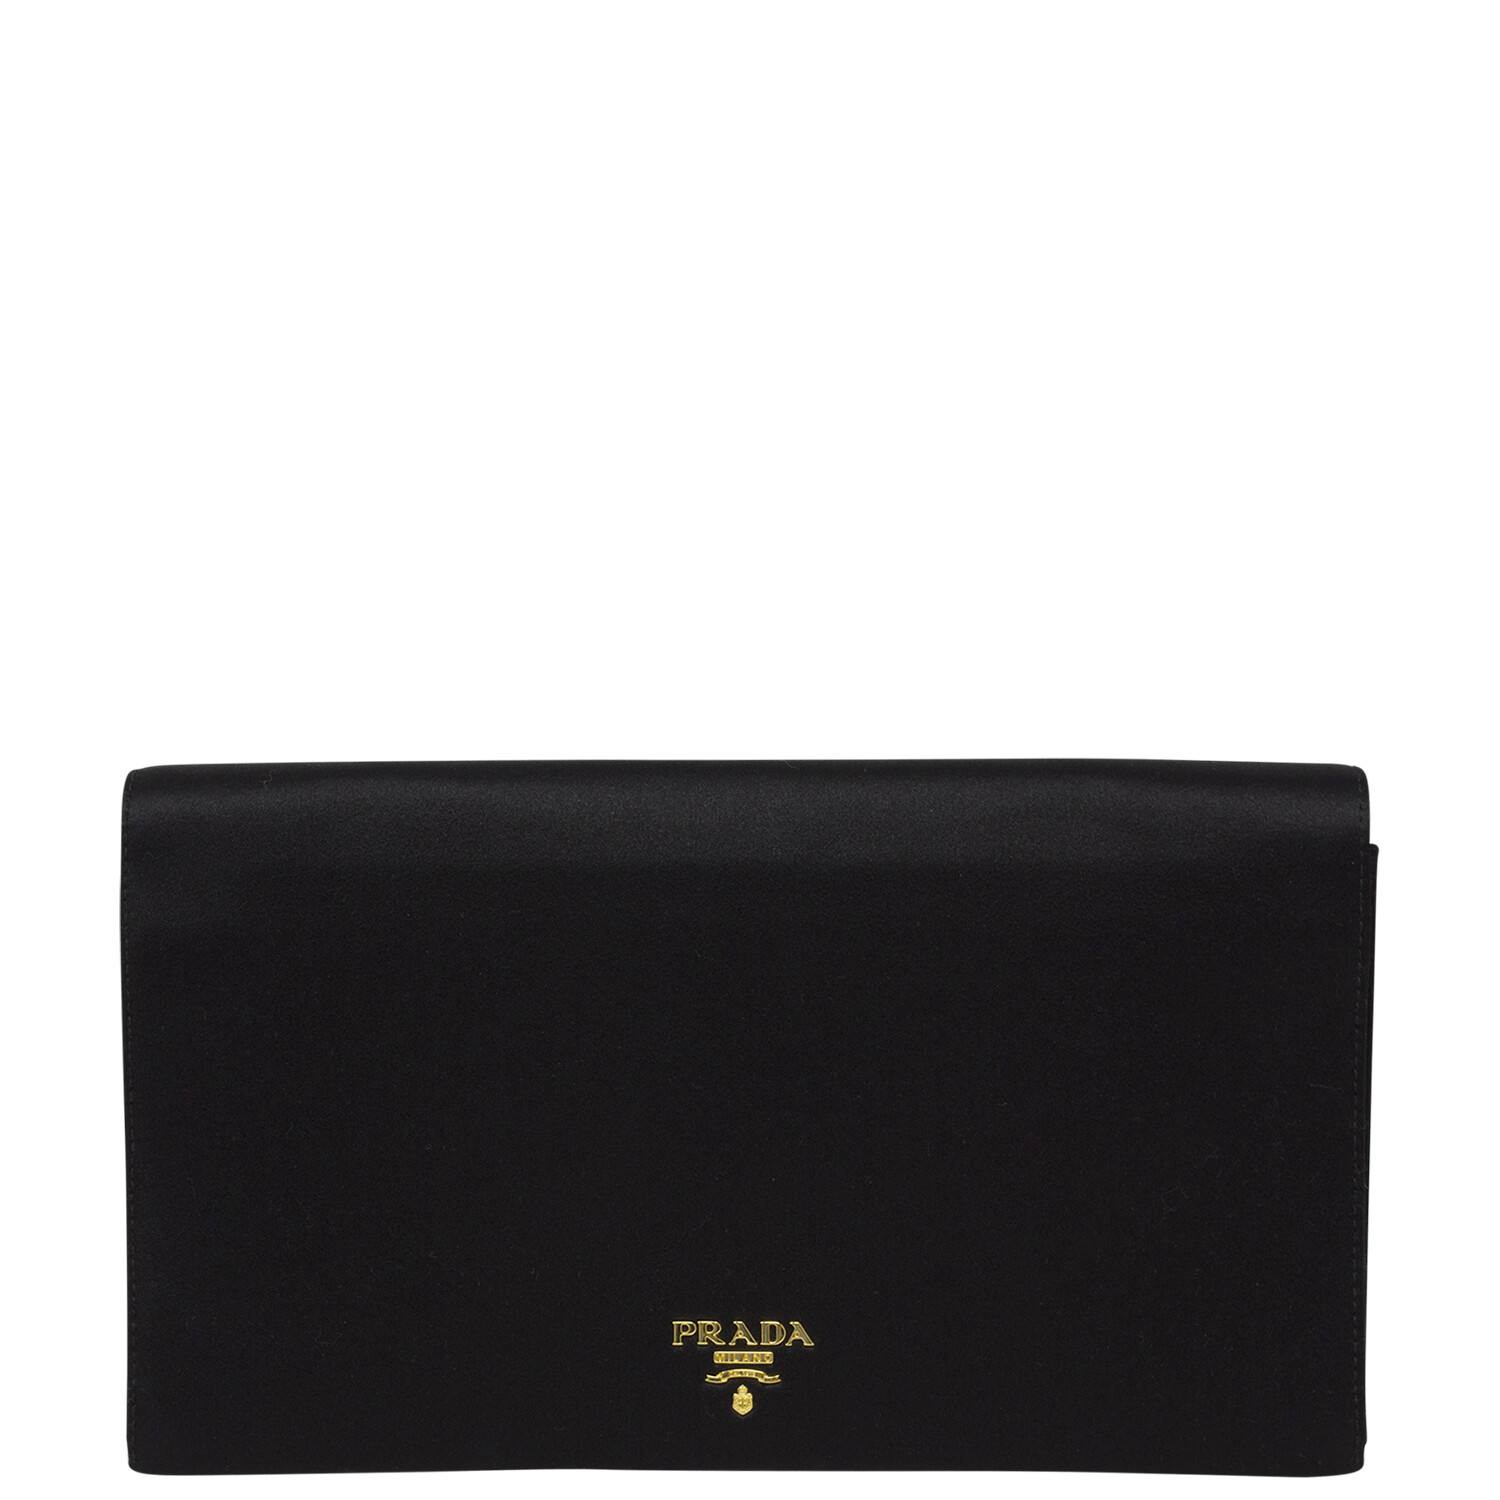 Prada Clutch with Stone Embellishment in Gold Sequin — UFO No More